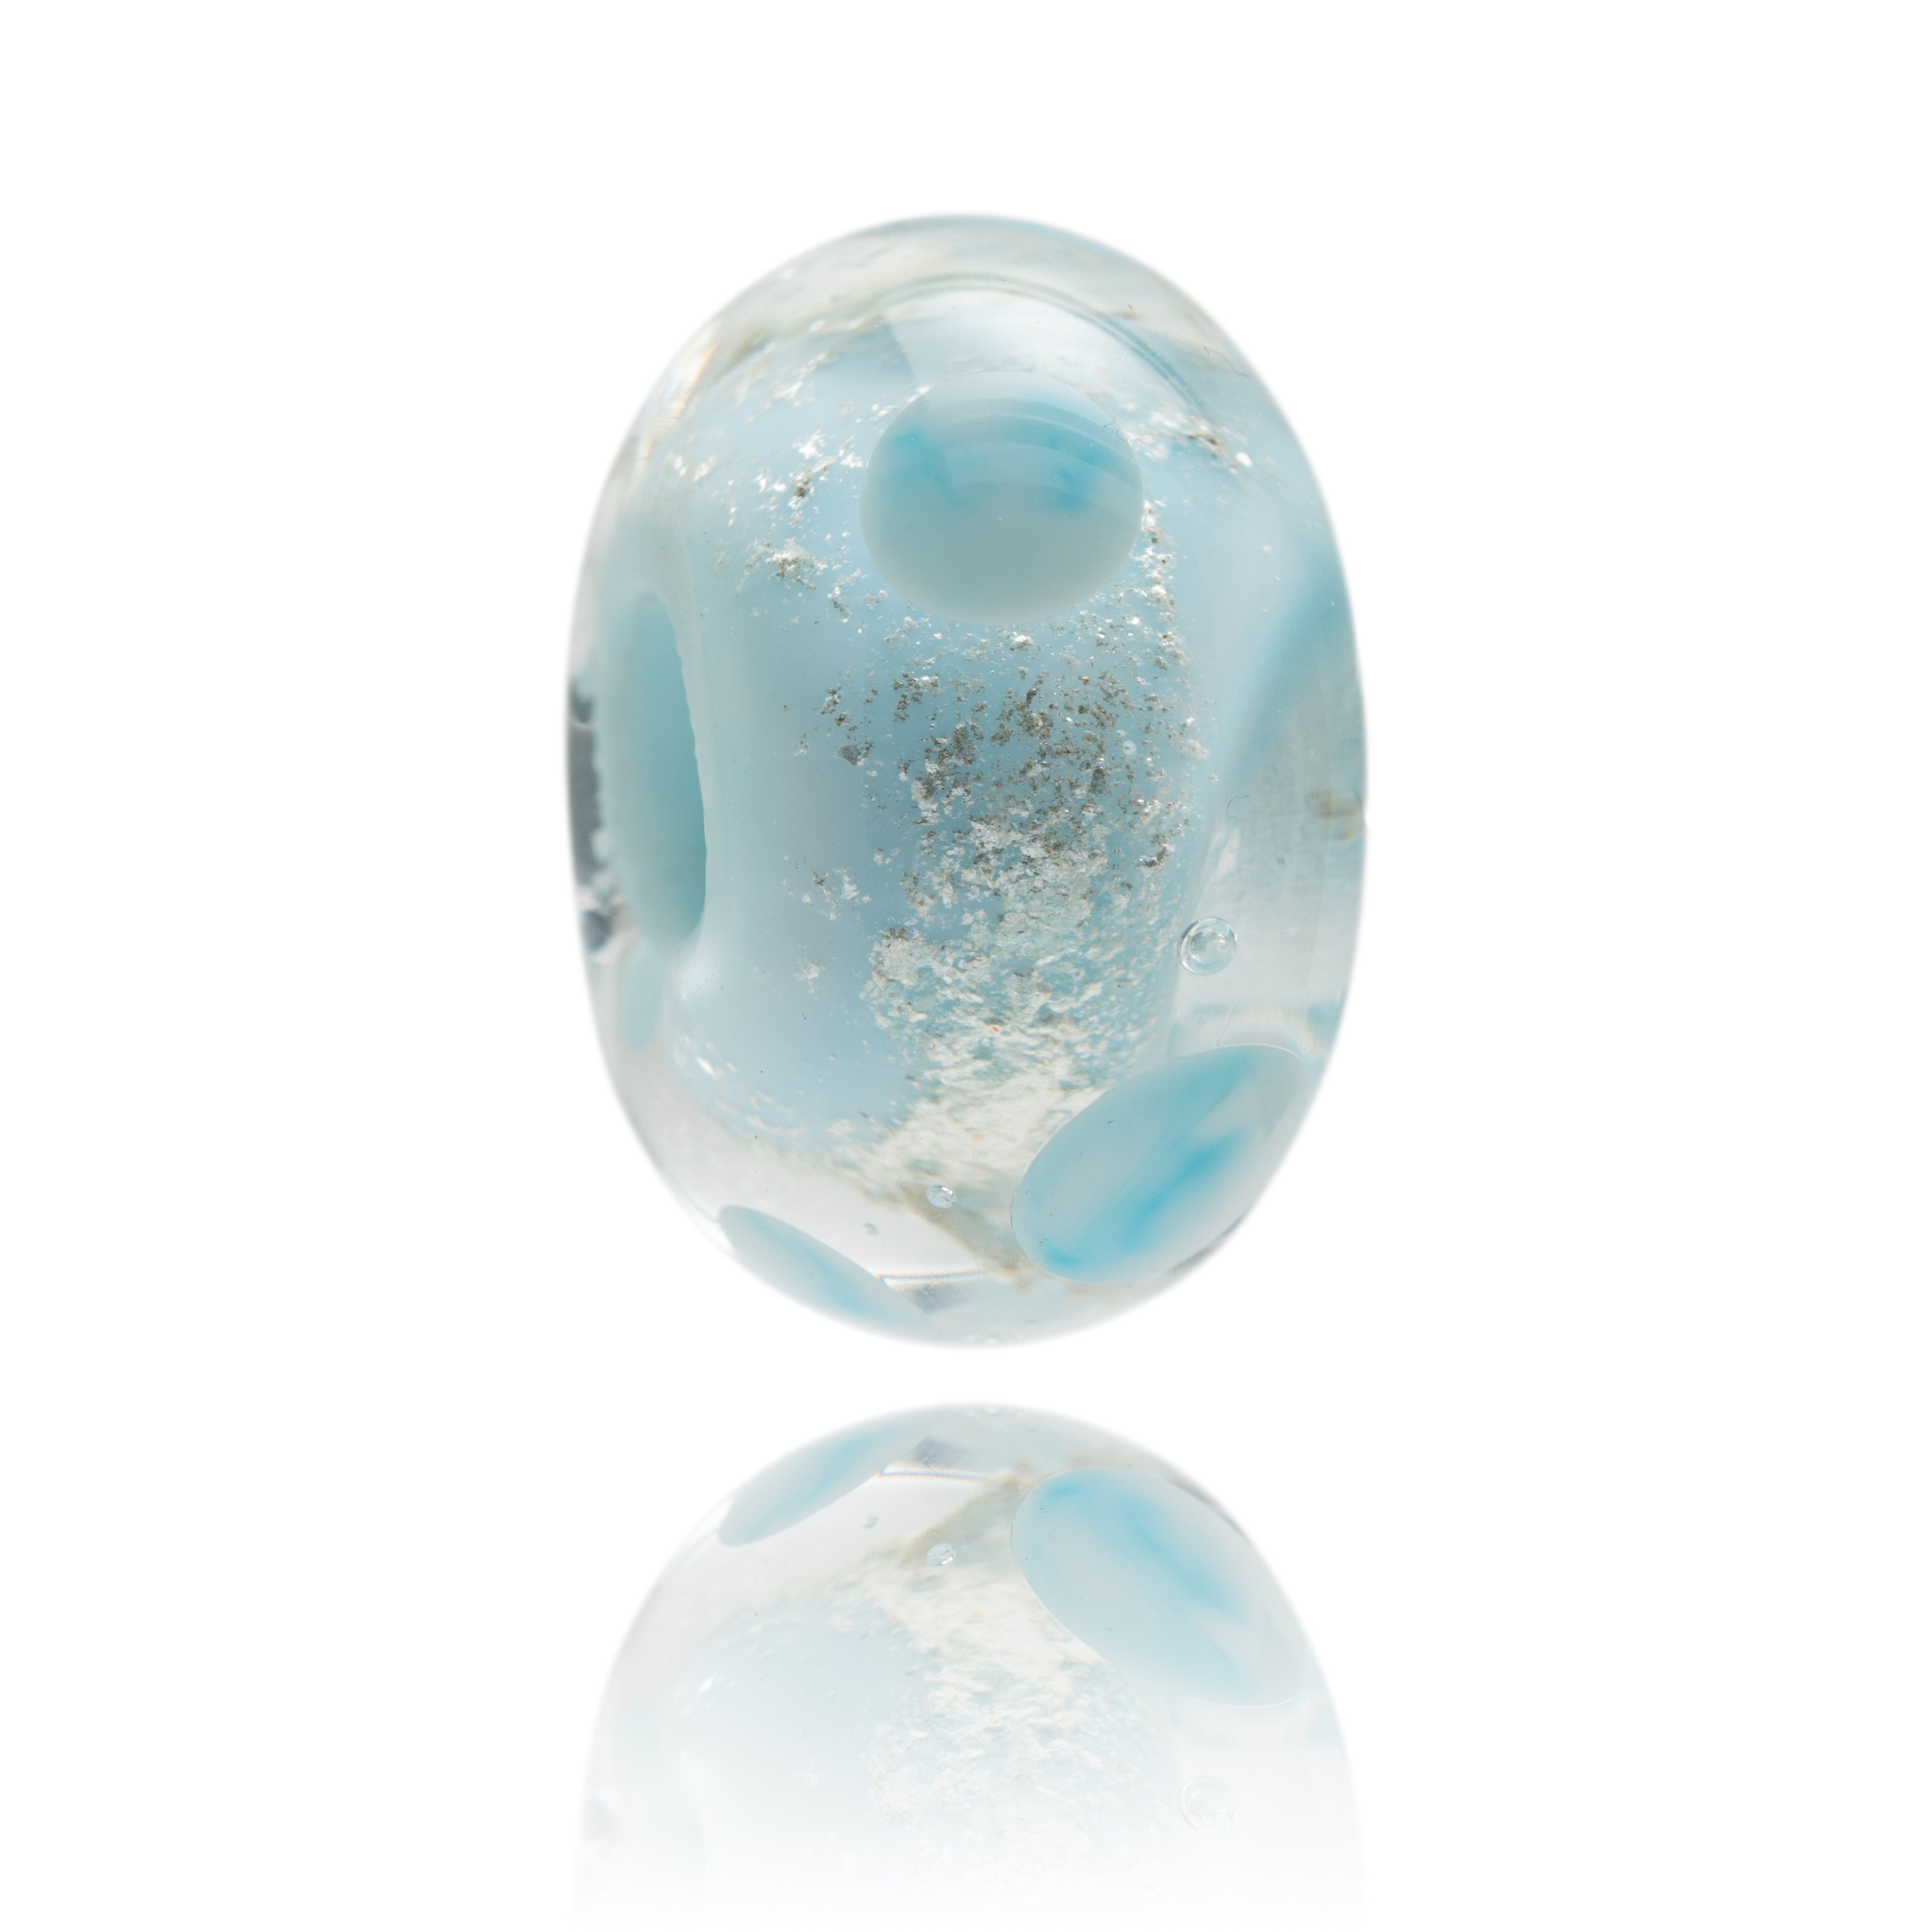 Light blue sparkly bead decorated with clear glass and dots. This glass bead represents Anglesey in Wales.